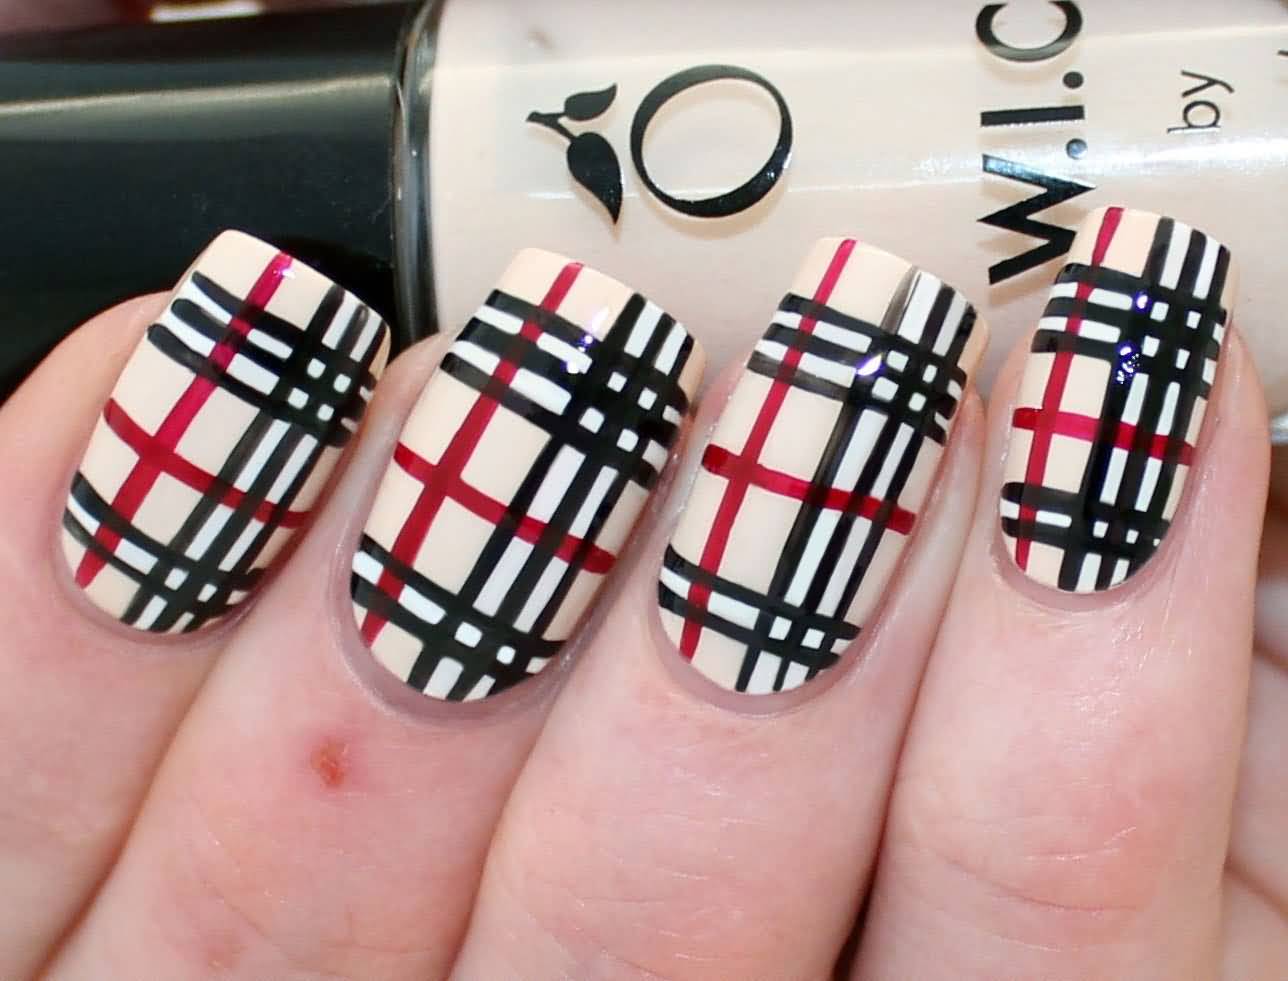 8. Burberry Brand Nail Stickers - wide 5